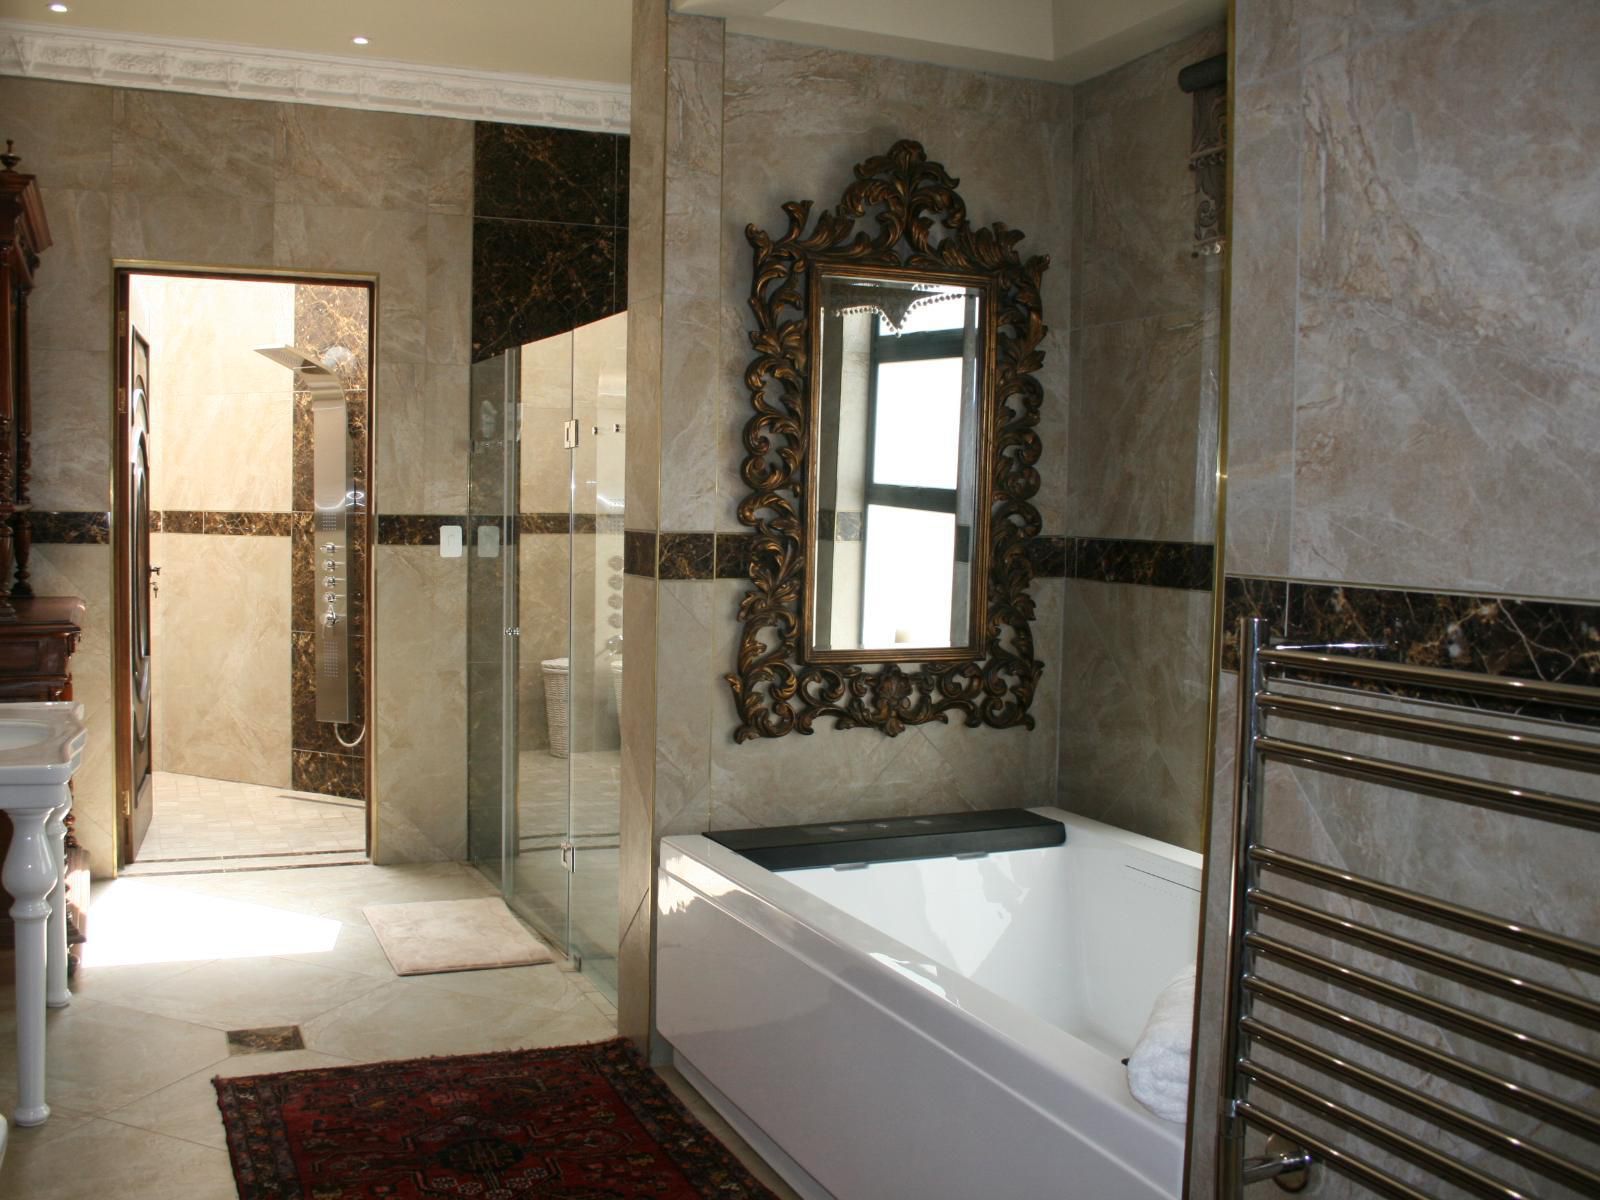 The Duke S Manor Modimolle Nylstroom Limpopo Province South Africa Bathroom